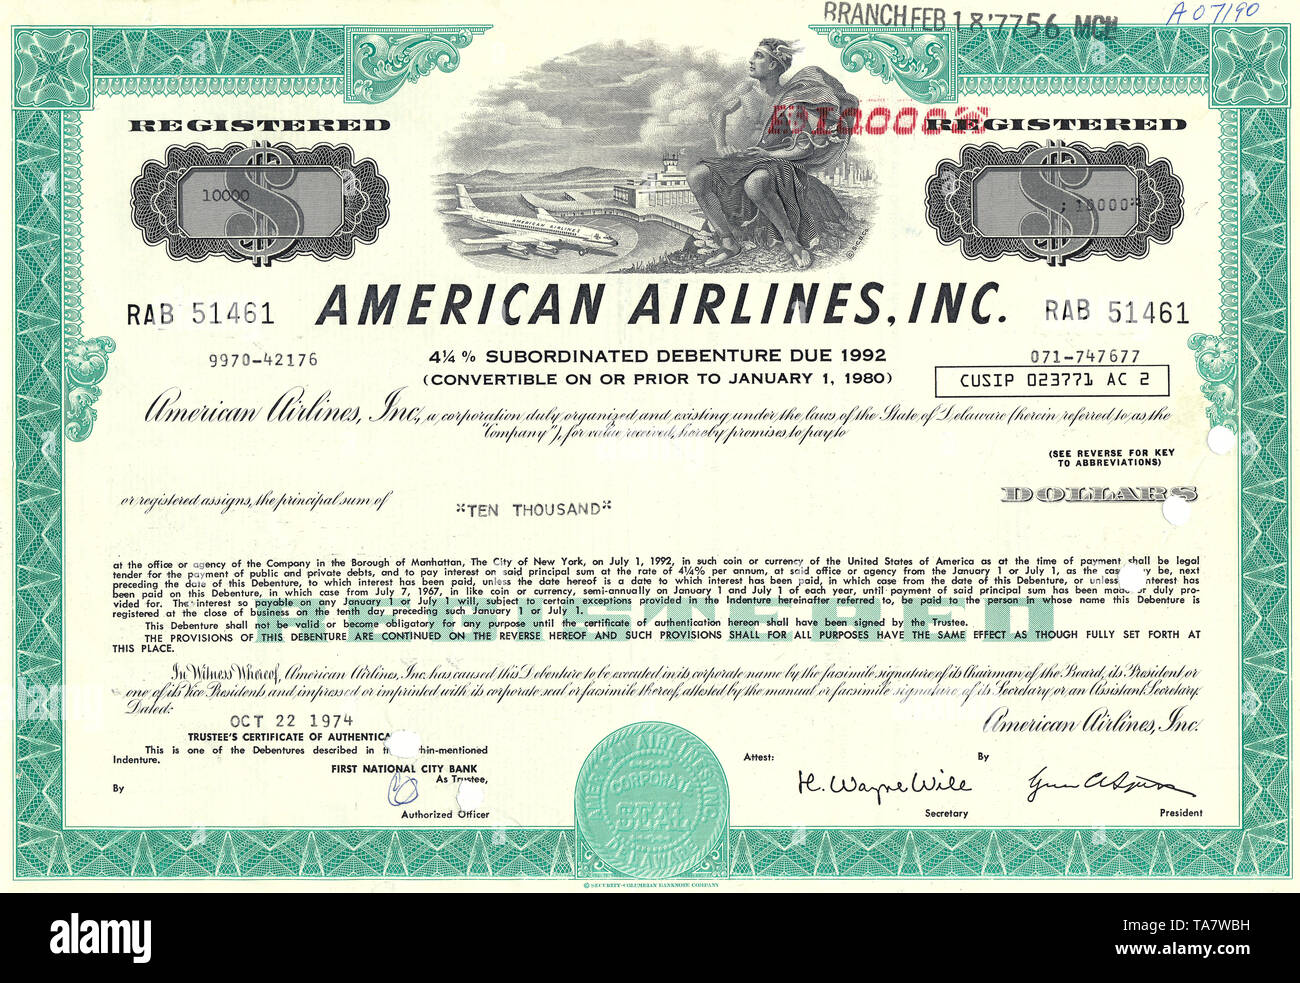 Historic Share Certificate Stock Photos & Historic Share ...